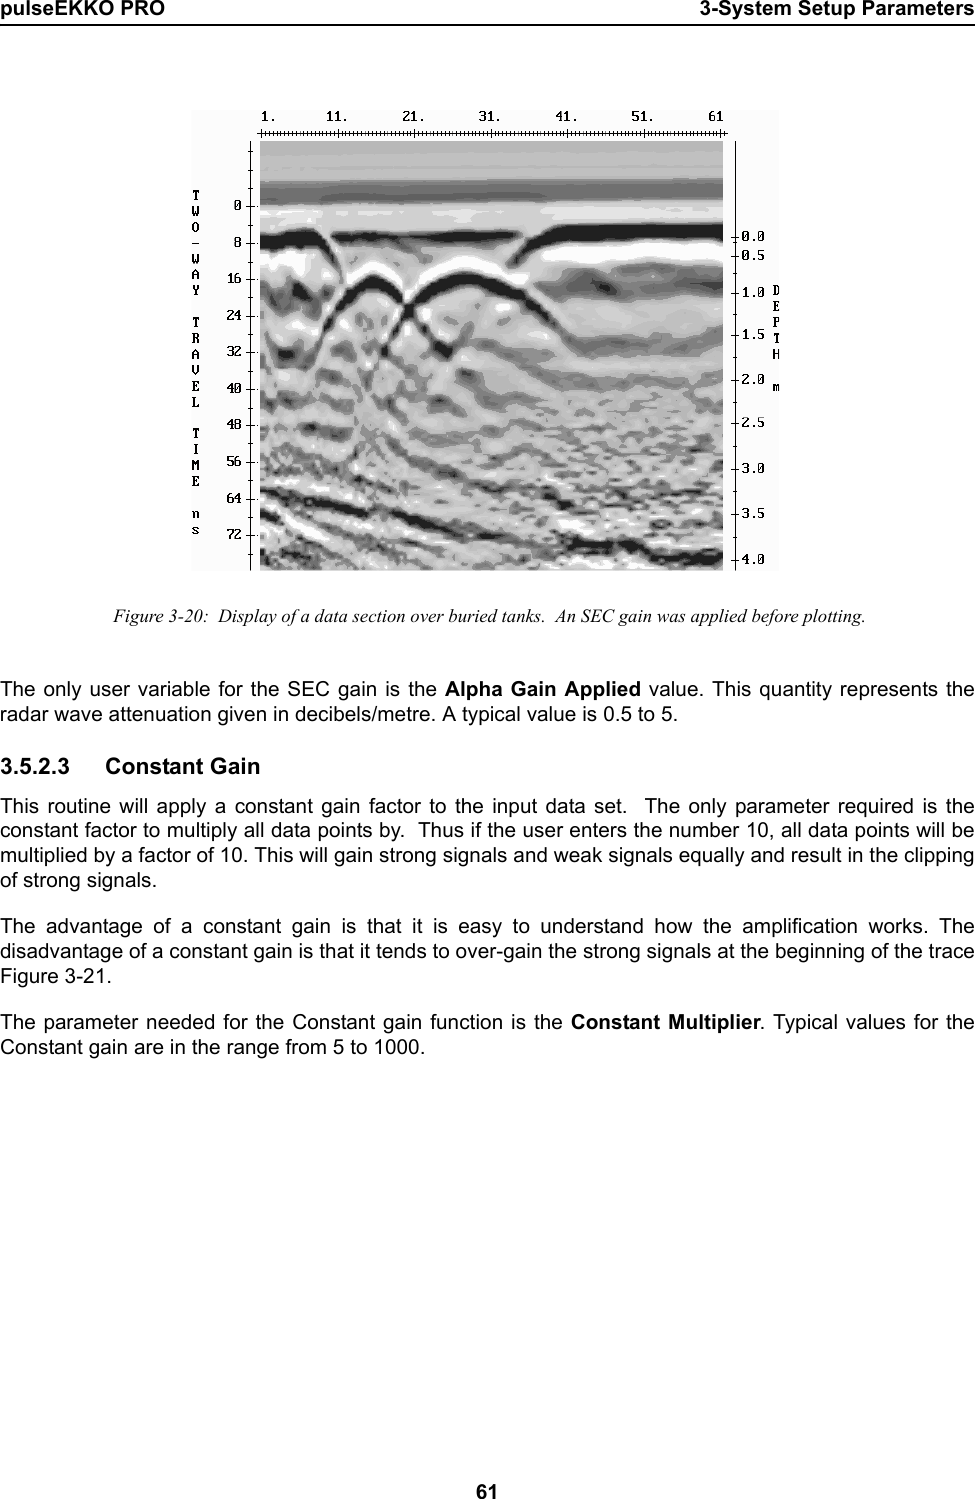 pulseEKKO PRO 3-System Setup Parameters61  Figure 3-20:  Display of a data section over buried tanks.  An SEC gain was applied before plotting.The only user variable for the SEC gain is the Alpha Gain Applied value. This quantity represents theradar wave attenuation given in decibels/metre. A typical value is 0.5 to 5.3.5.2.3 Constant Gain This routine will apply a constant gain factor to the input data set.  The only parameter required is theconstant factor to multiply all data points by.  Thus if the user enters the number 10, all data points will bemultiplied by a factor of 10. This will gain strong signals and weak signals equally and result in the clippingof strong signals.The advantage of a constant gain is that it is easy to understand how the amplification works. Thedisadvantage of a constant gain is that it tends to over-gain the strong signals at the beginning of the traceFigure 3-21.  The parameter needed for the Constant gain function is the Constant Multiplier. Typical values for theConstant gain are in the range from 5 to 1000.